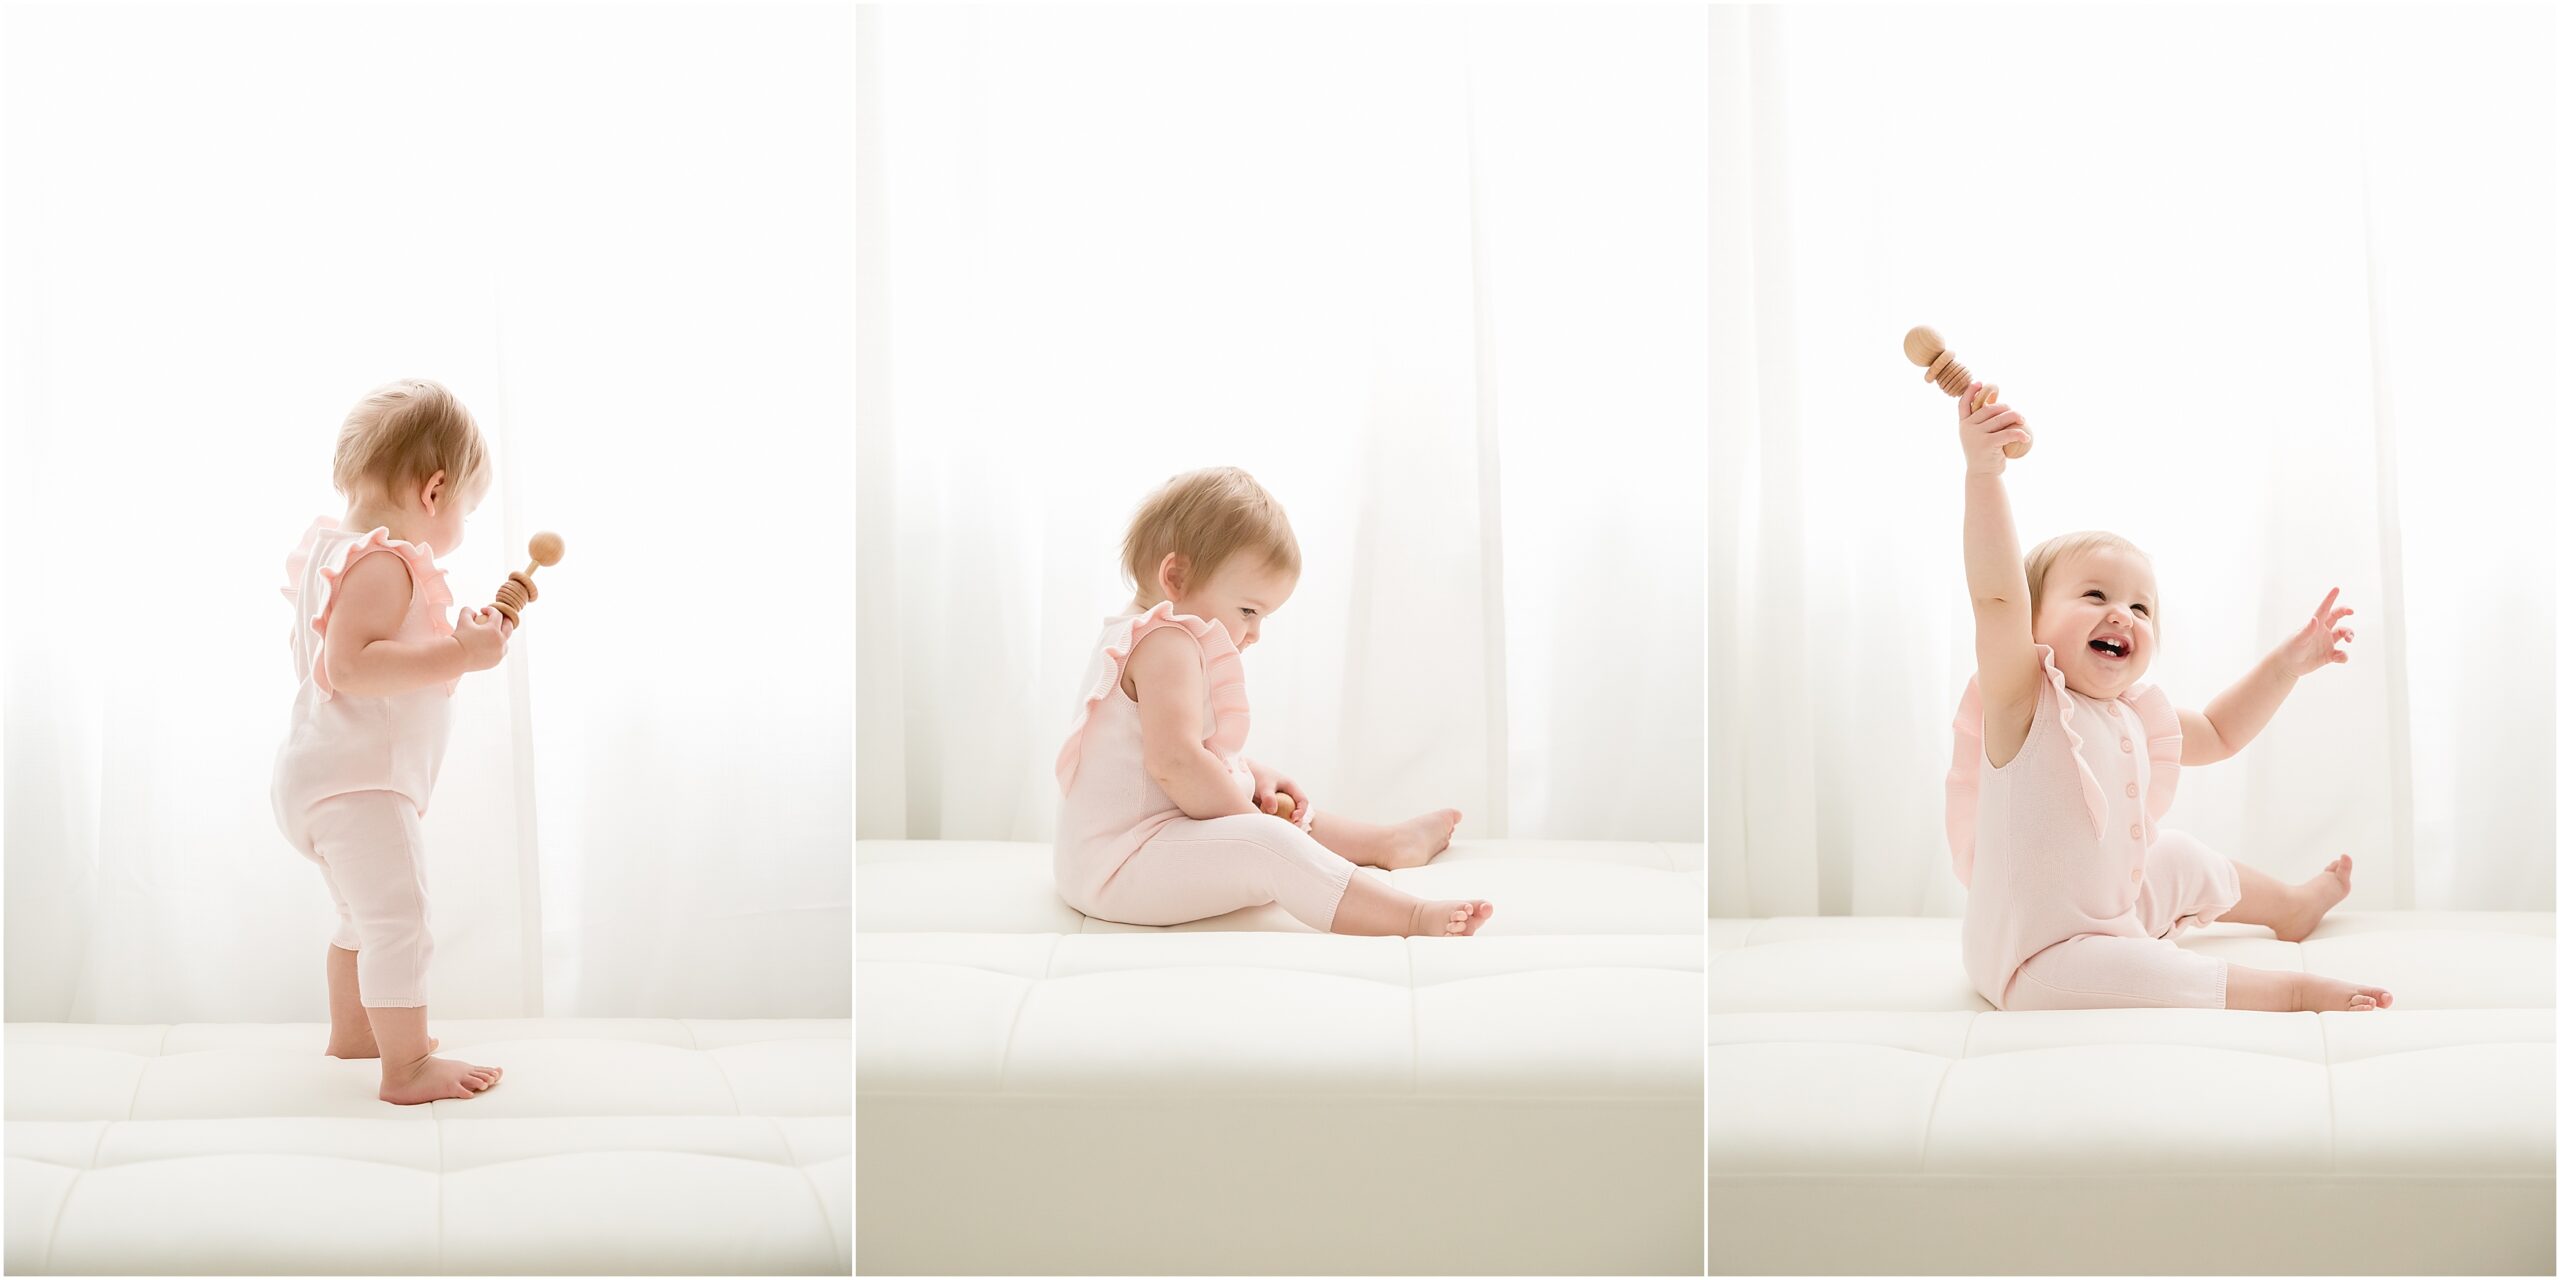 Collage of three photos of a one year old baby girl wearing a pink outfit and playing with a wooden toy